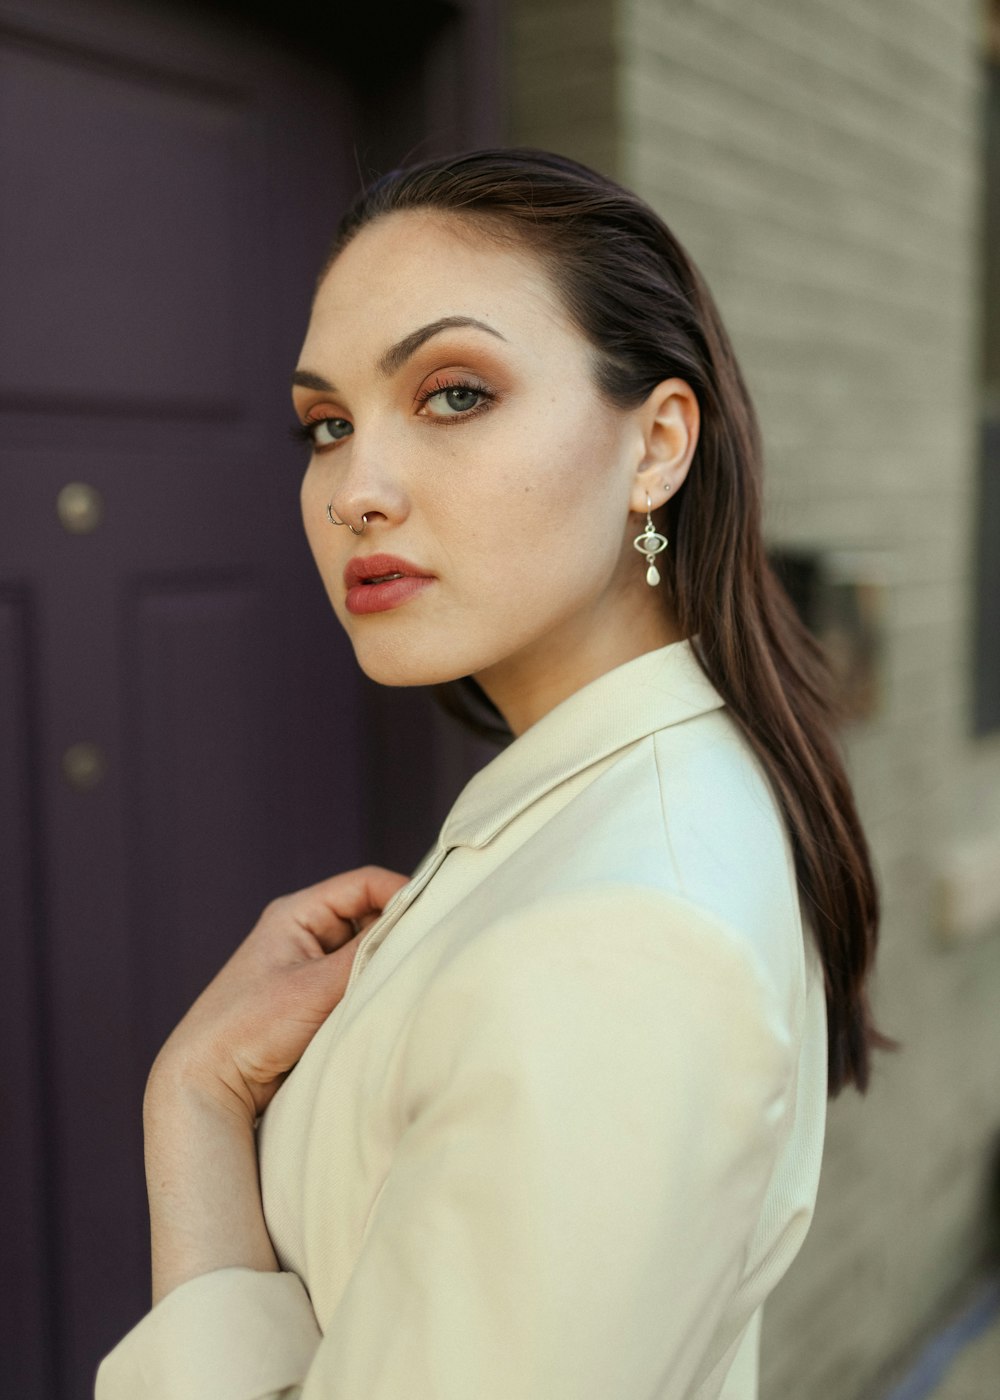 a woman in a white jacket and earrings